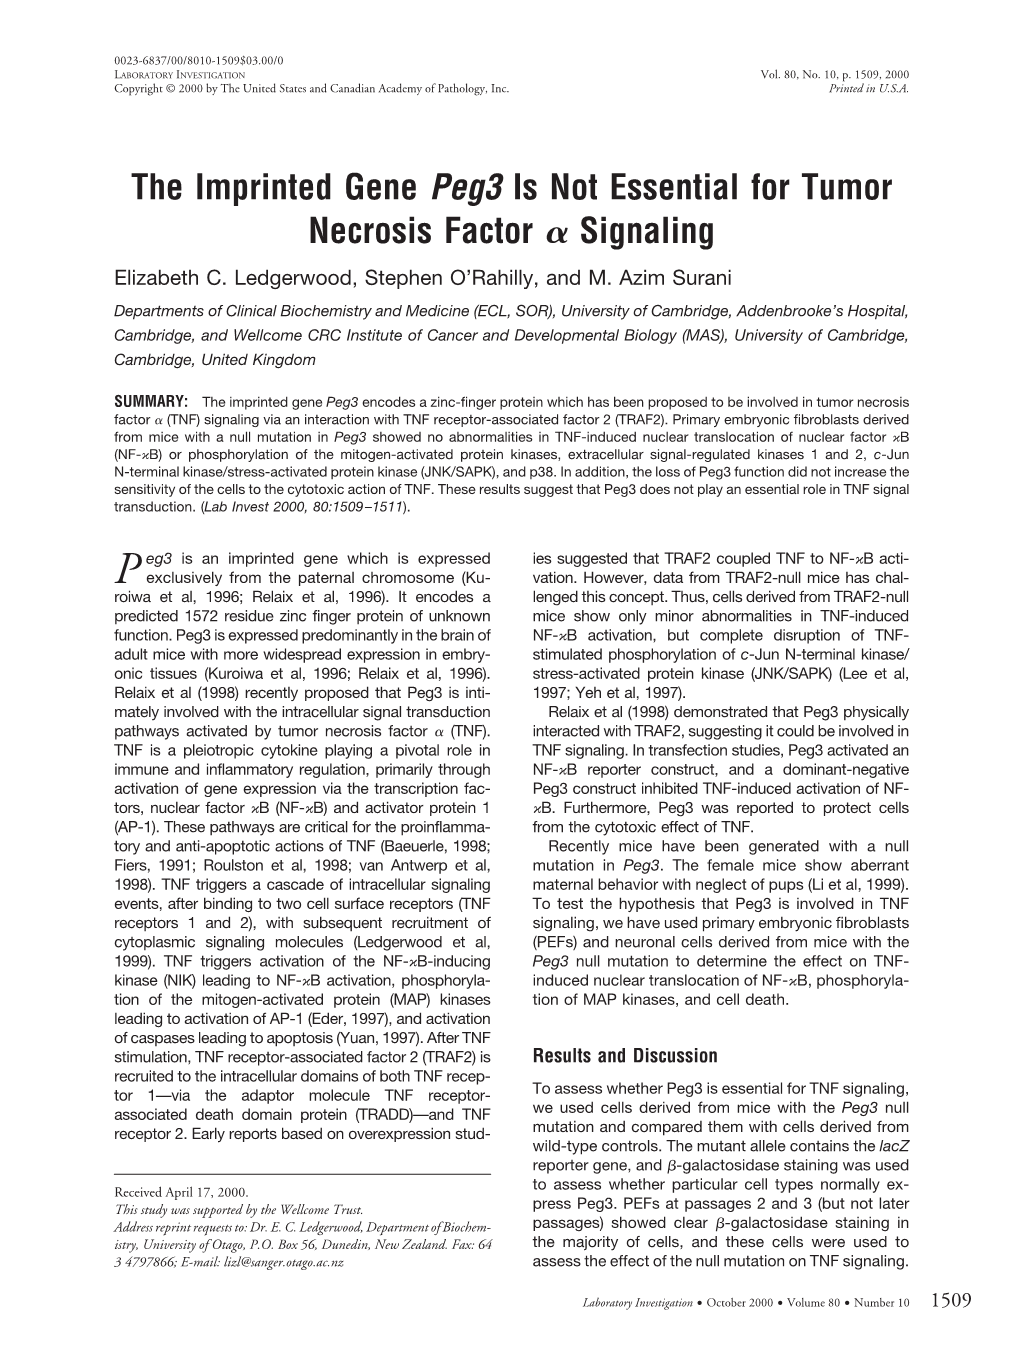 The Imprinted Gene Peg3 Is Not Essential for Tumor Necrosis Factor Signaling